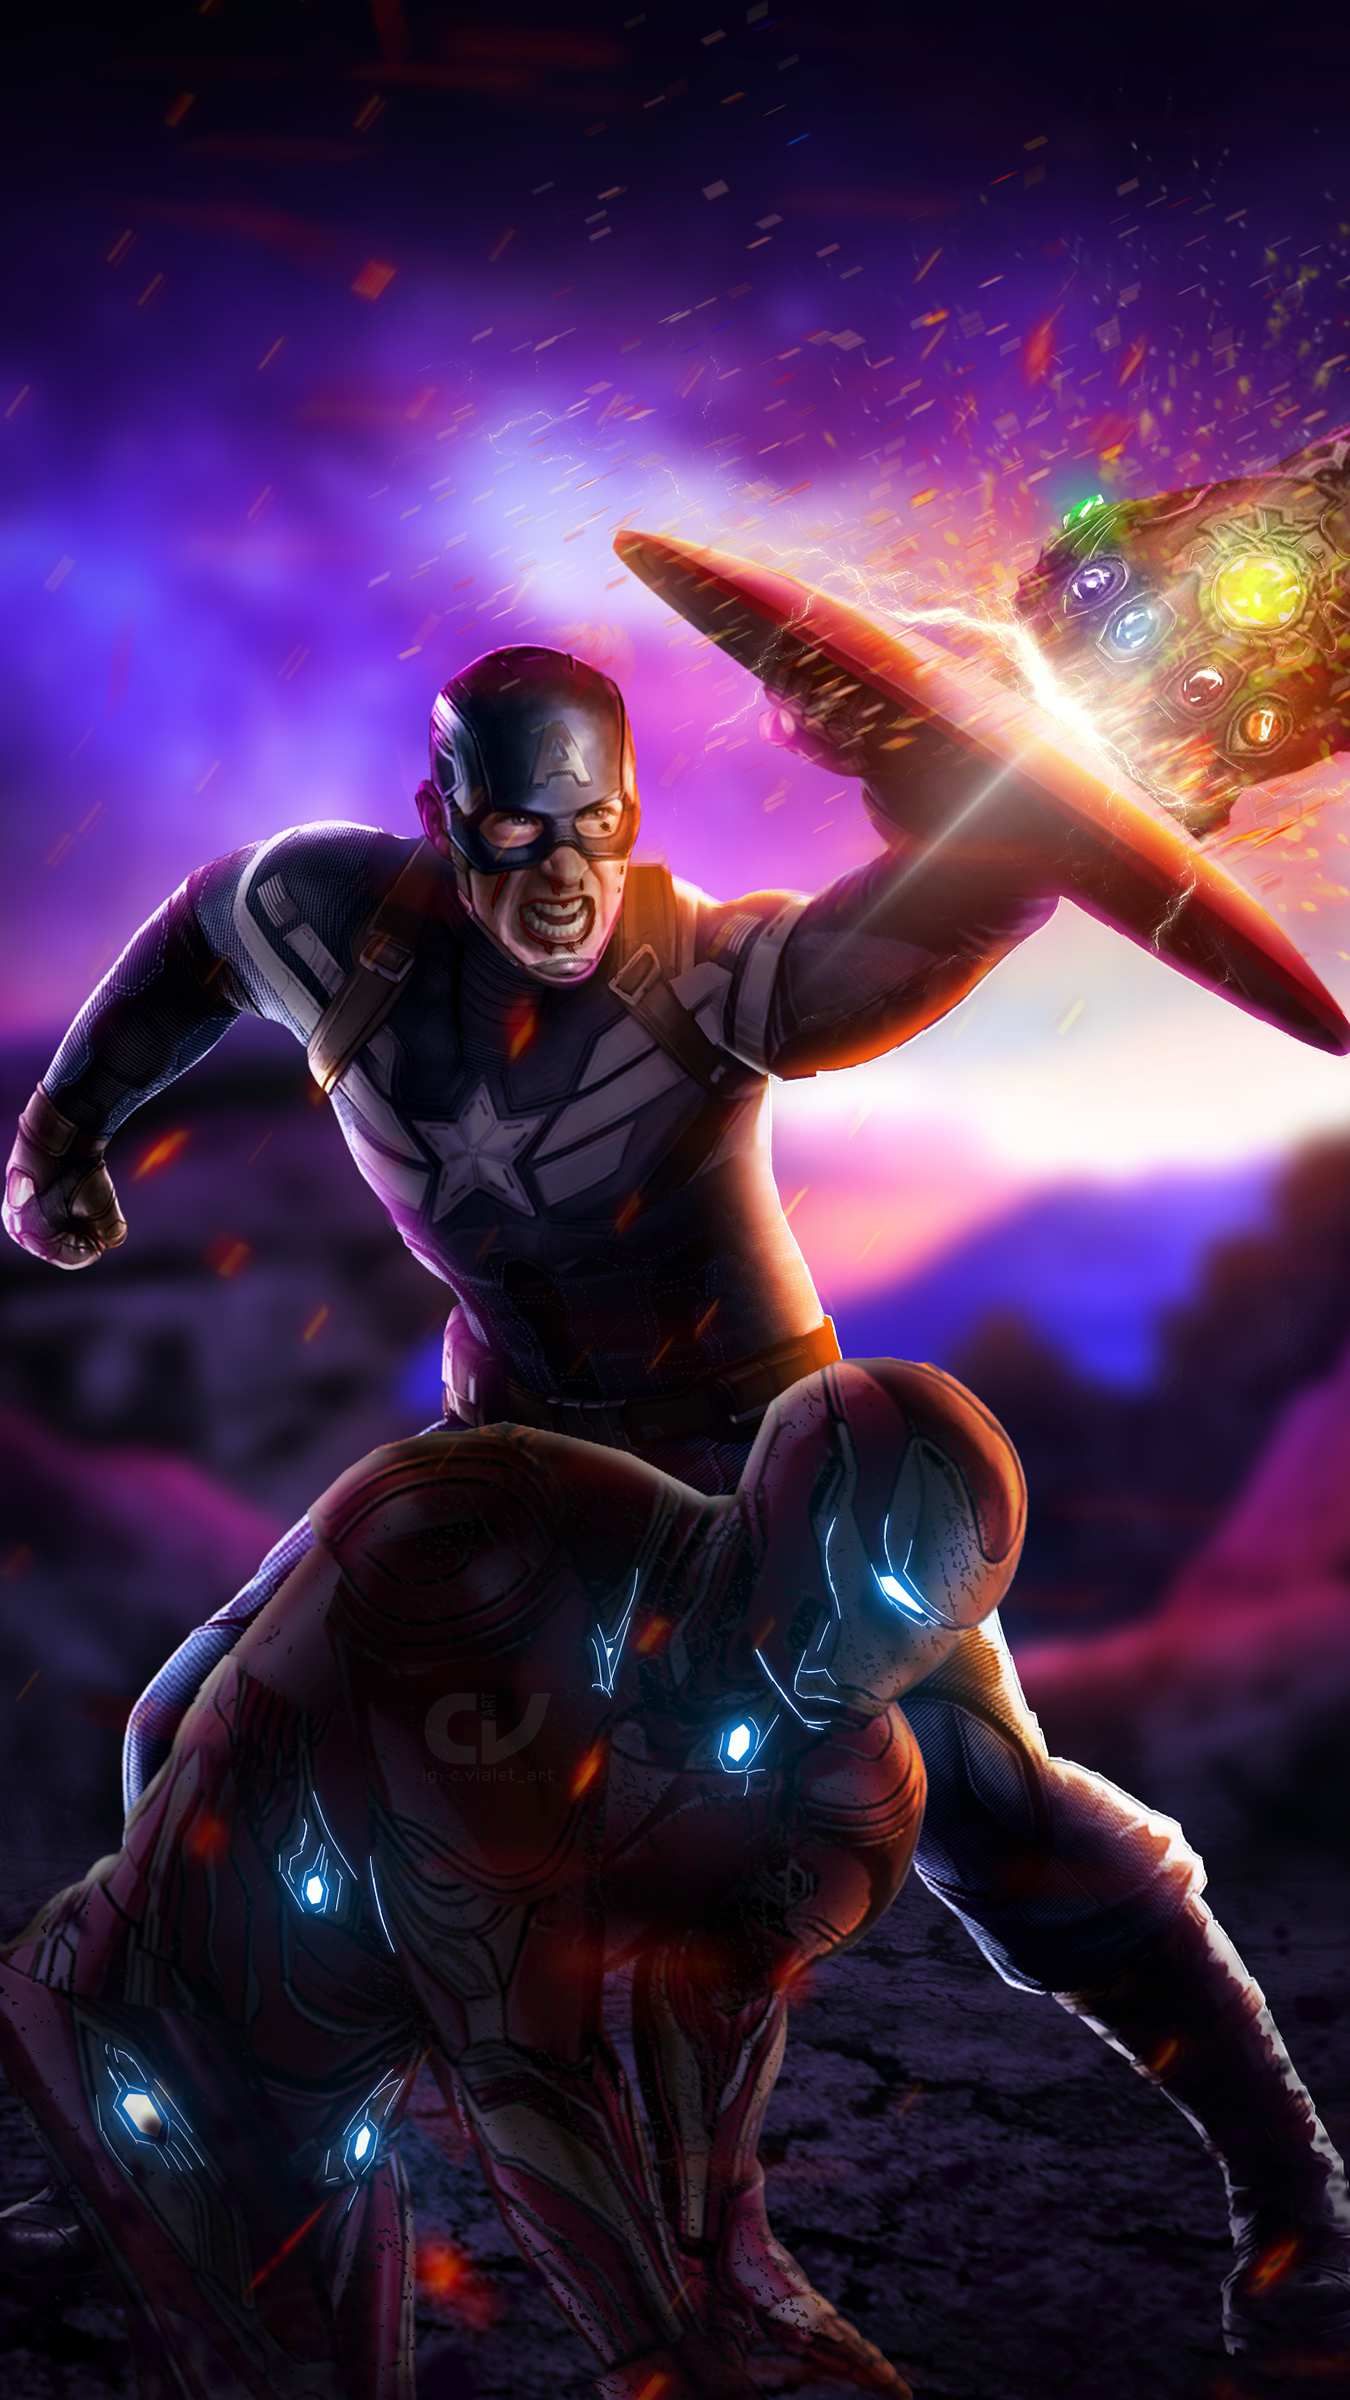 Captain and Tony Fighting Thanos Avengers Endgame iPhone Wallpaper